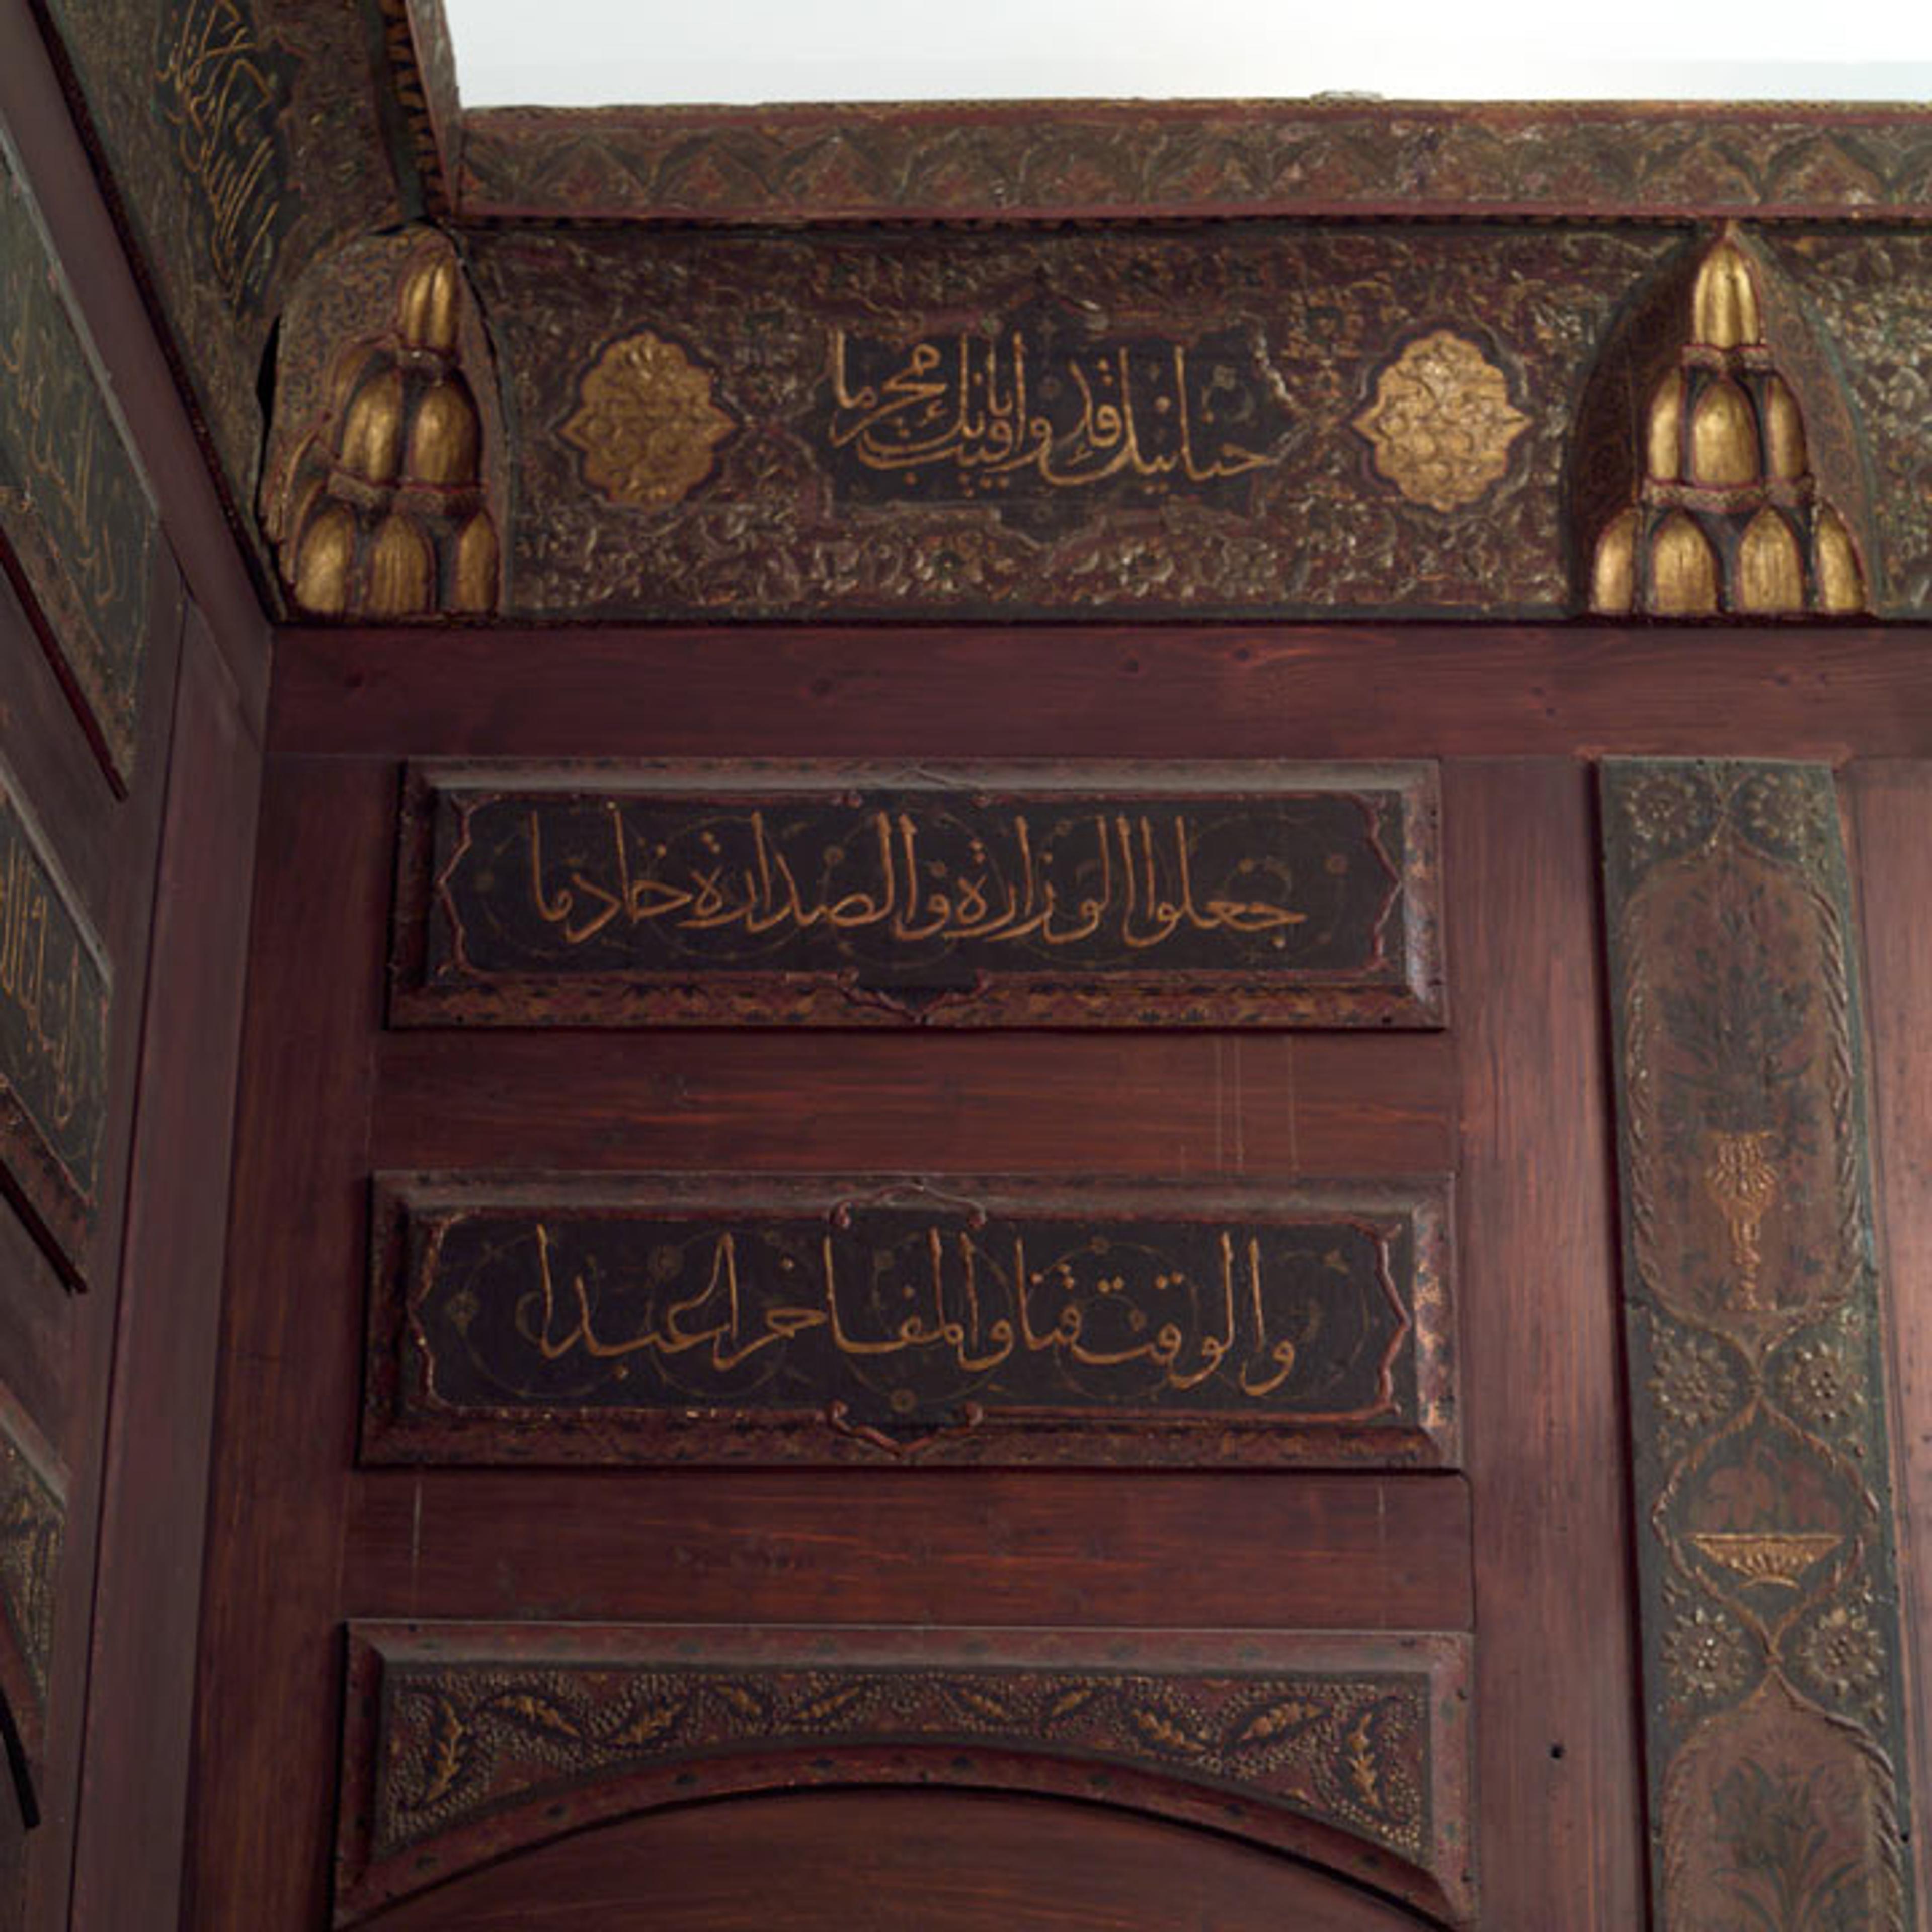 Detail view of calligraphy inlaid on wood paneling